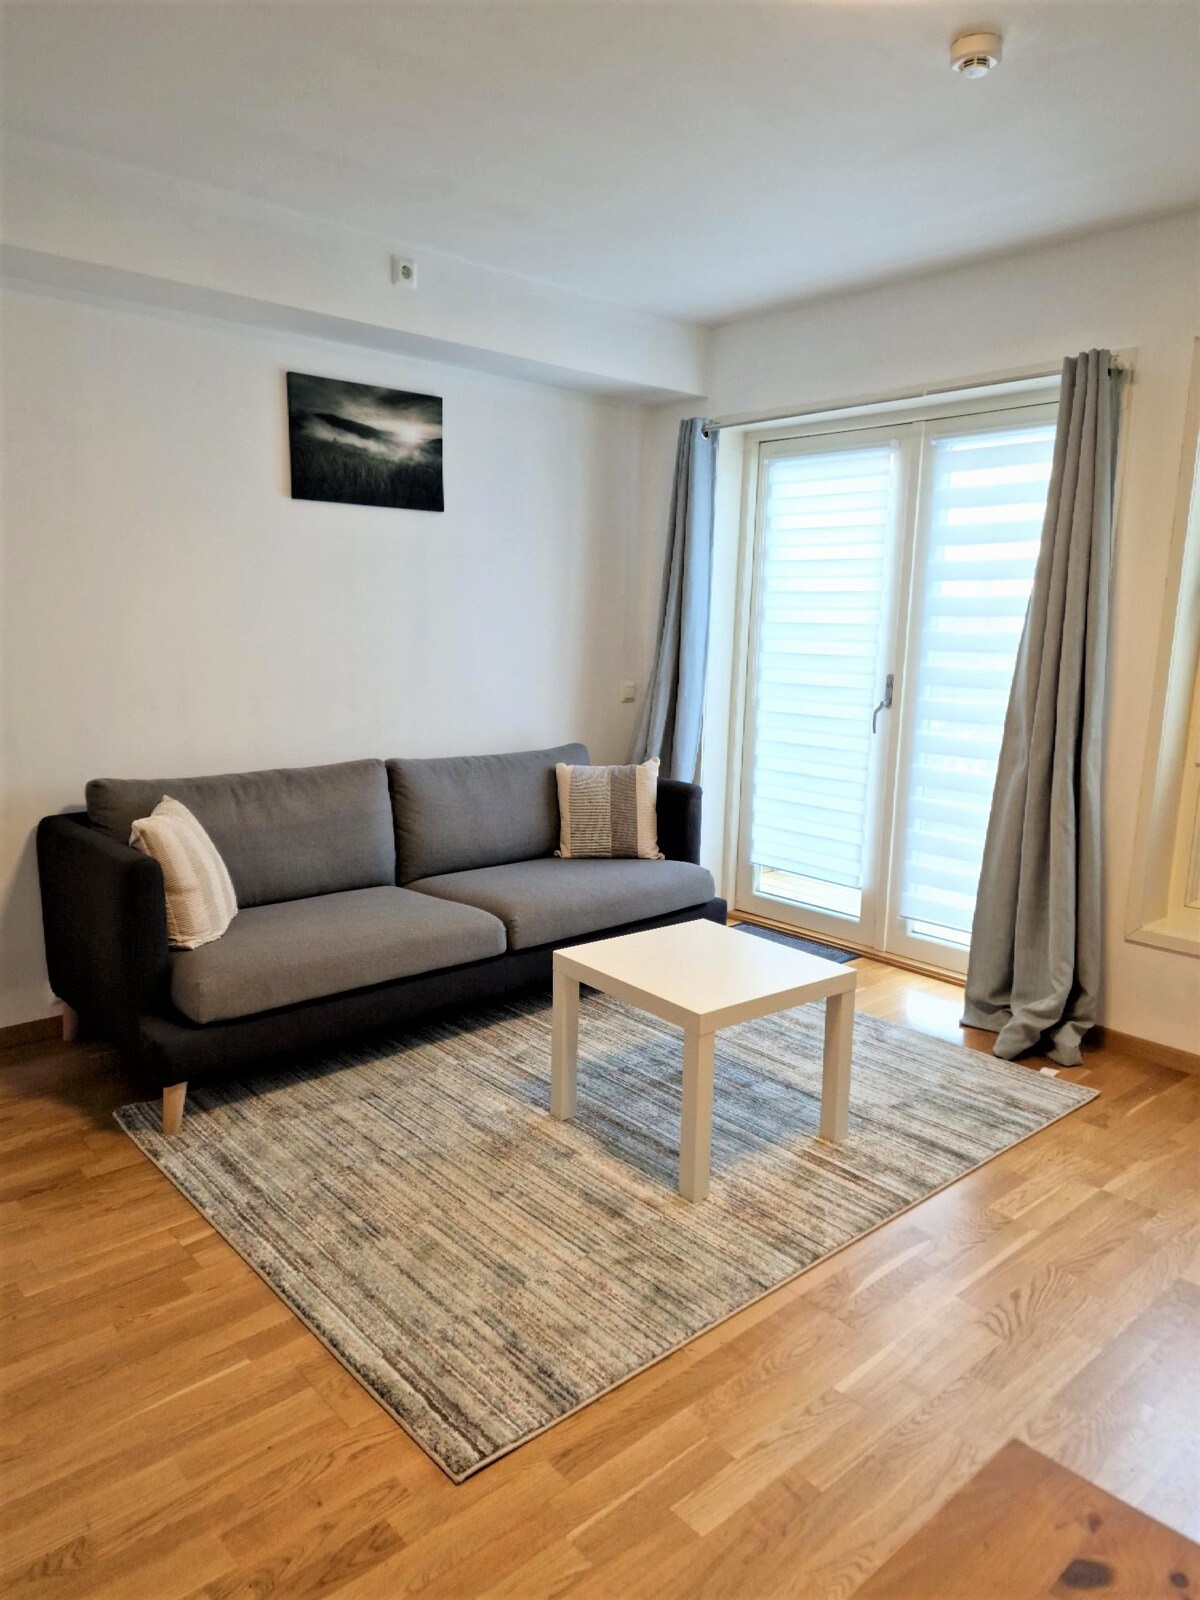 Demims Apartments- 15mins to Oslo - free parking